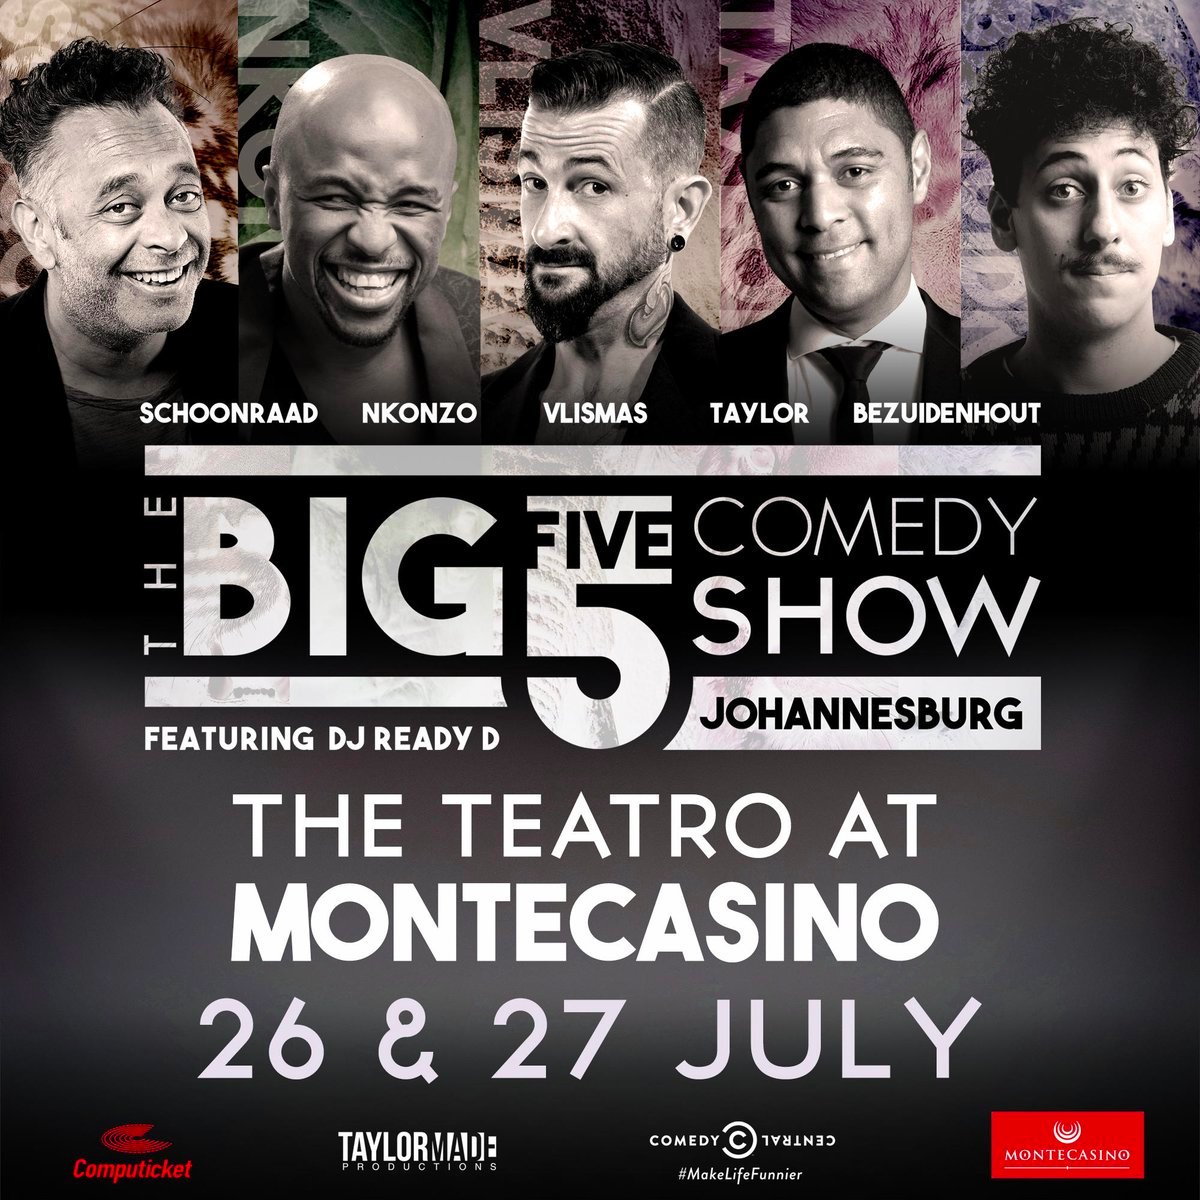 Latest details on the @Big5Comedy will be on The Sandton Times tomorrow! It's all happening at @MonteCasinoZA this weekend, July 26 & July 27, featuring @kurtschoonraad, @TatsNkonzo, @fortyshort, @TheStuartTaylor and @schalkiebez, supported by @DJReadyD. #Big5ComedyShow #Comedy